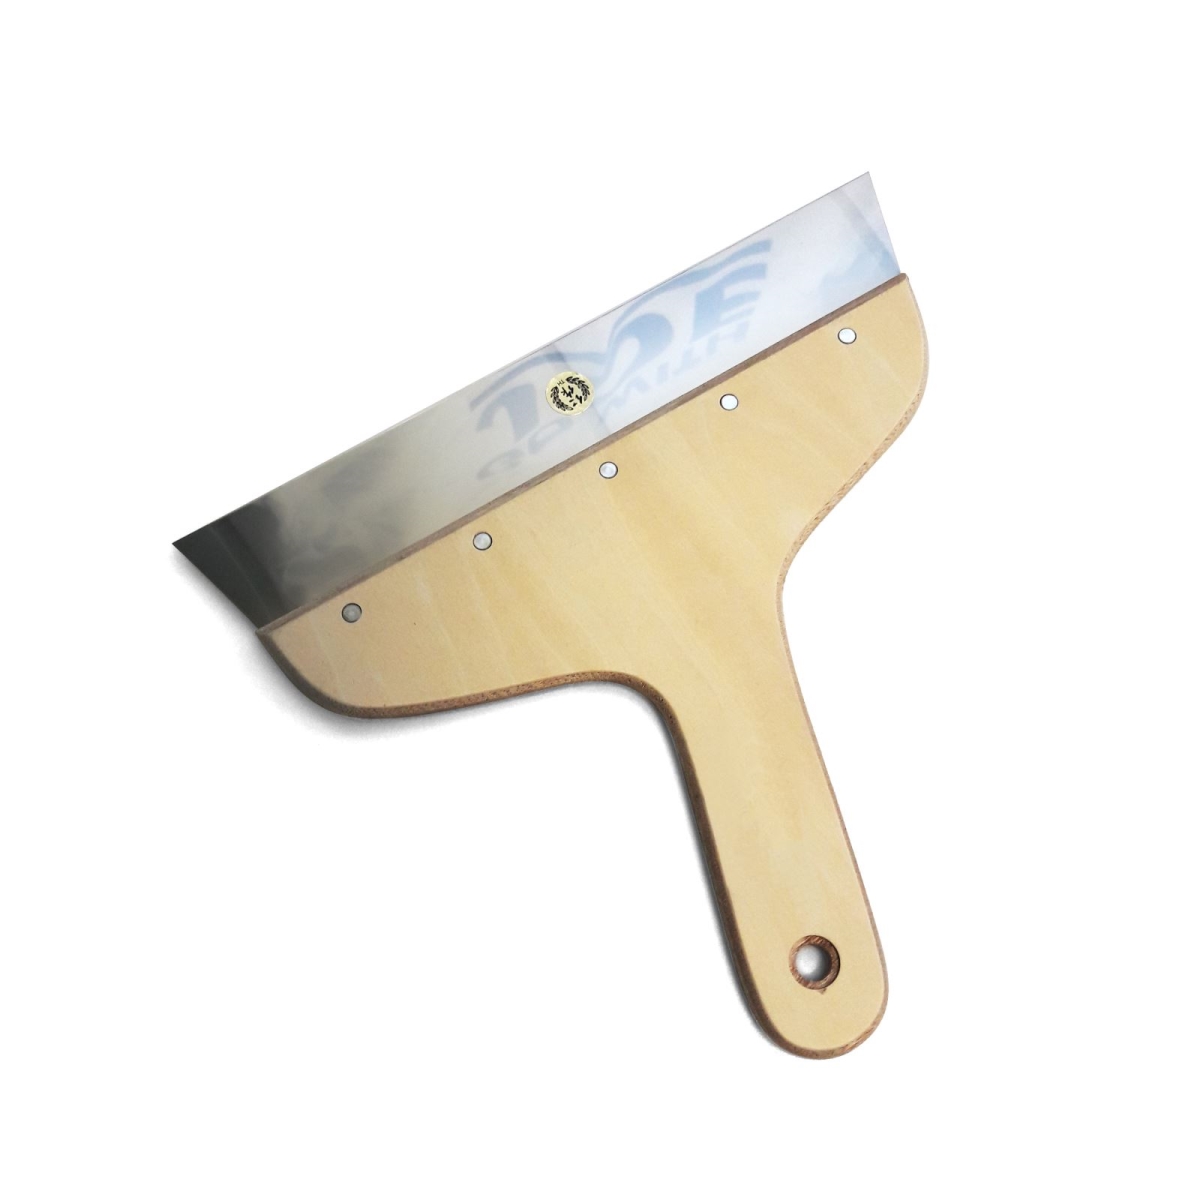 Njp520 10 In. Blade Stainless Steel Putty Knife